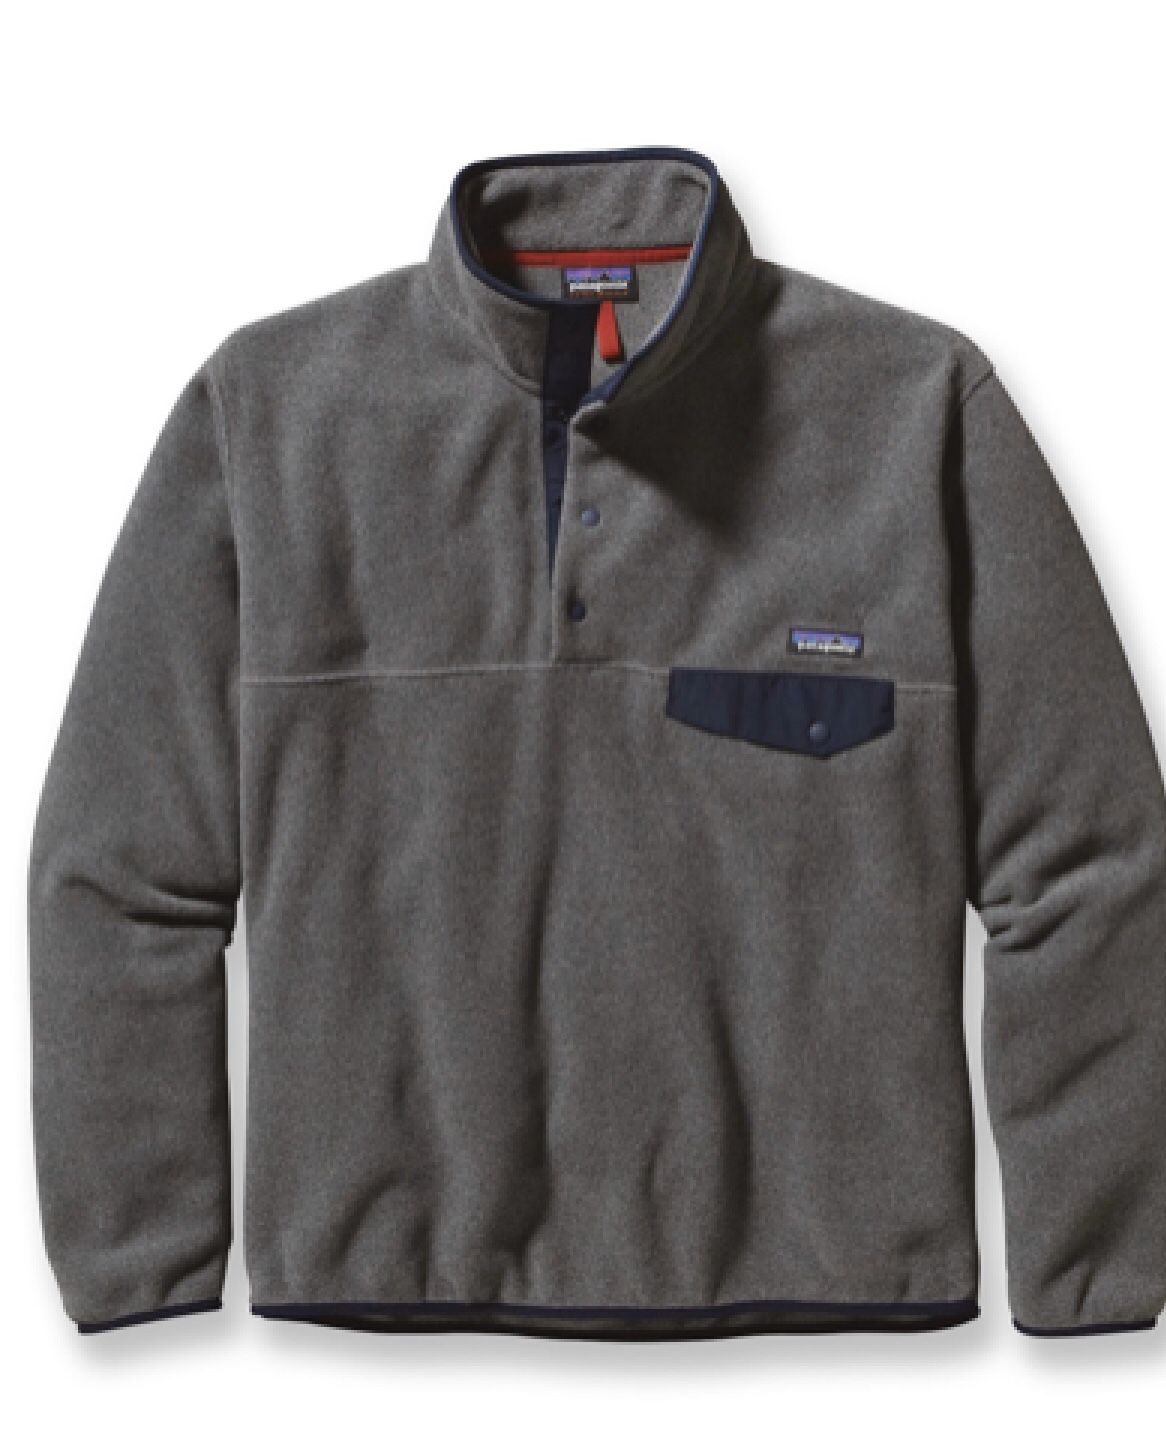 Patagonia Snap T Pullover Men’s XS Grey/blue